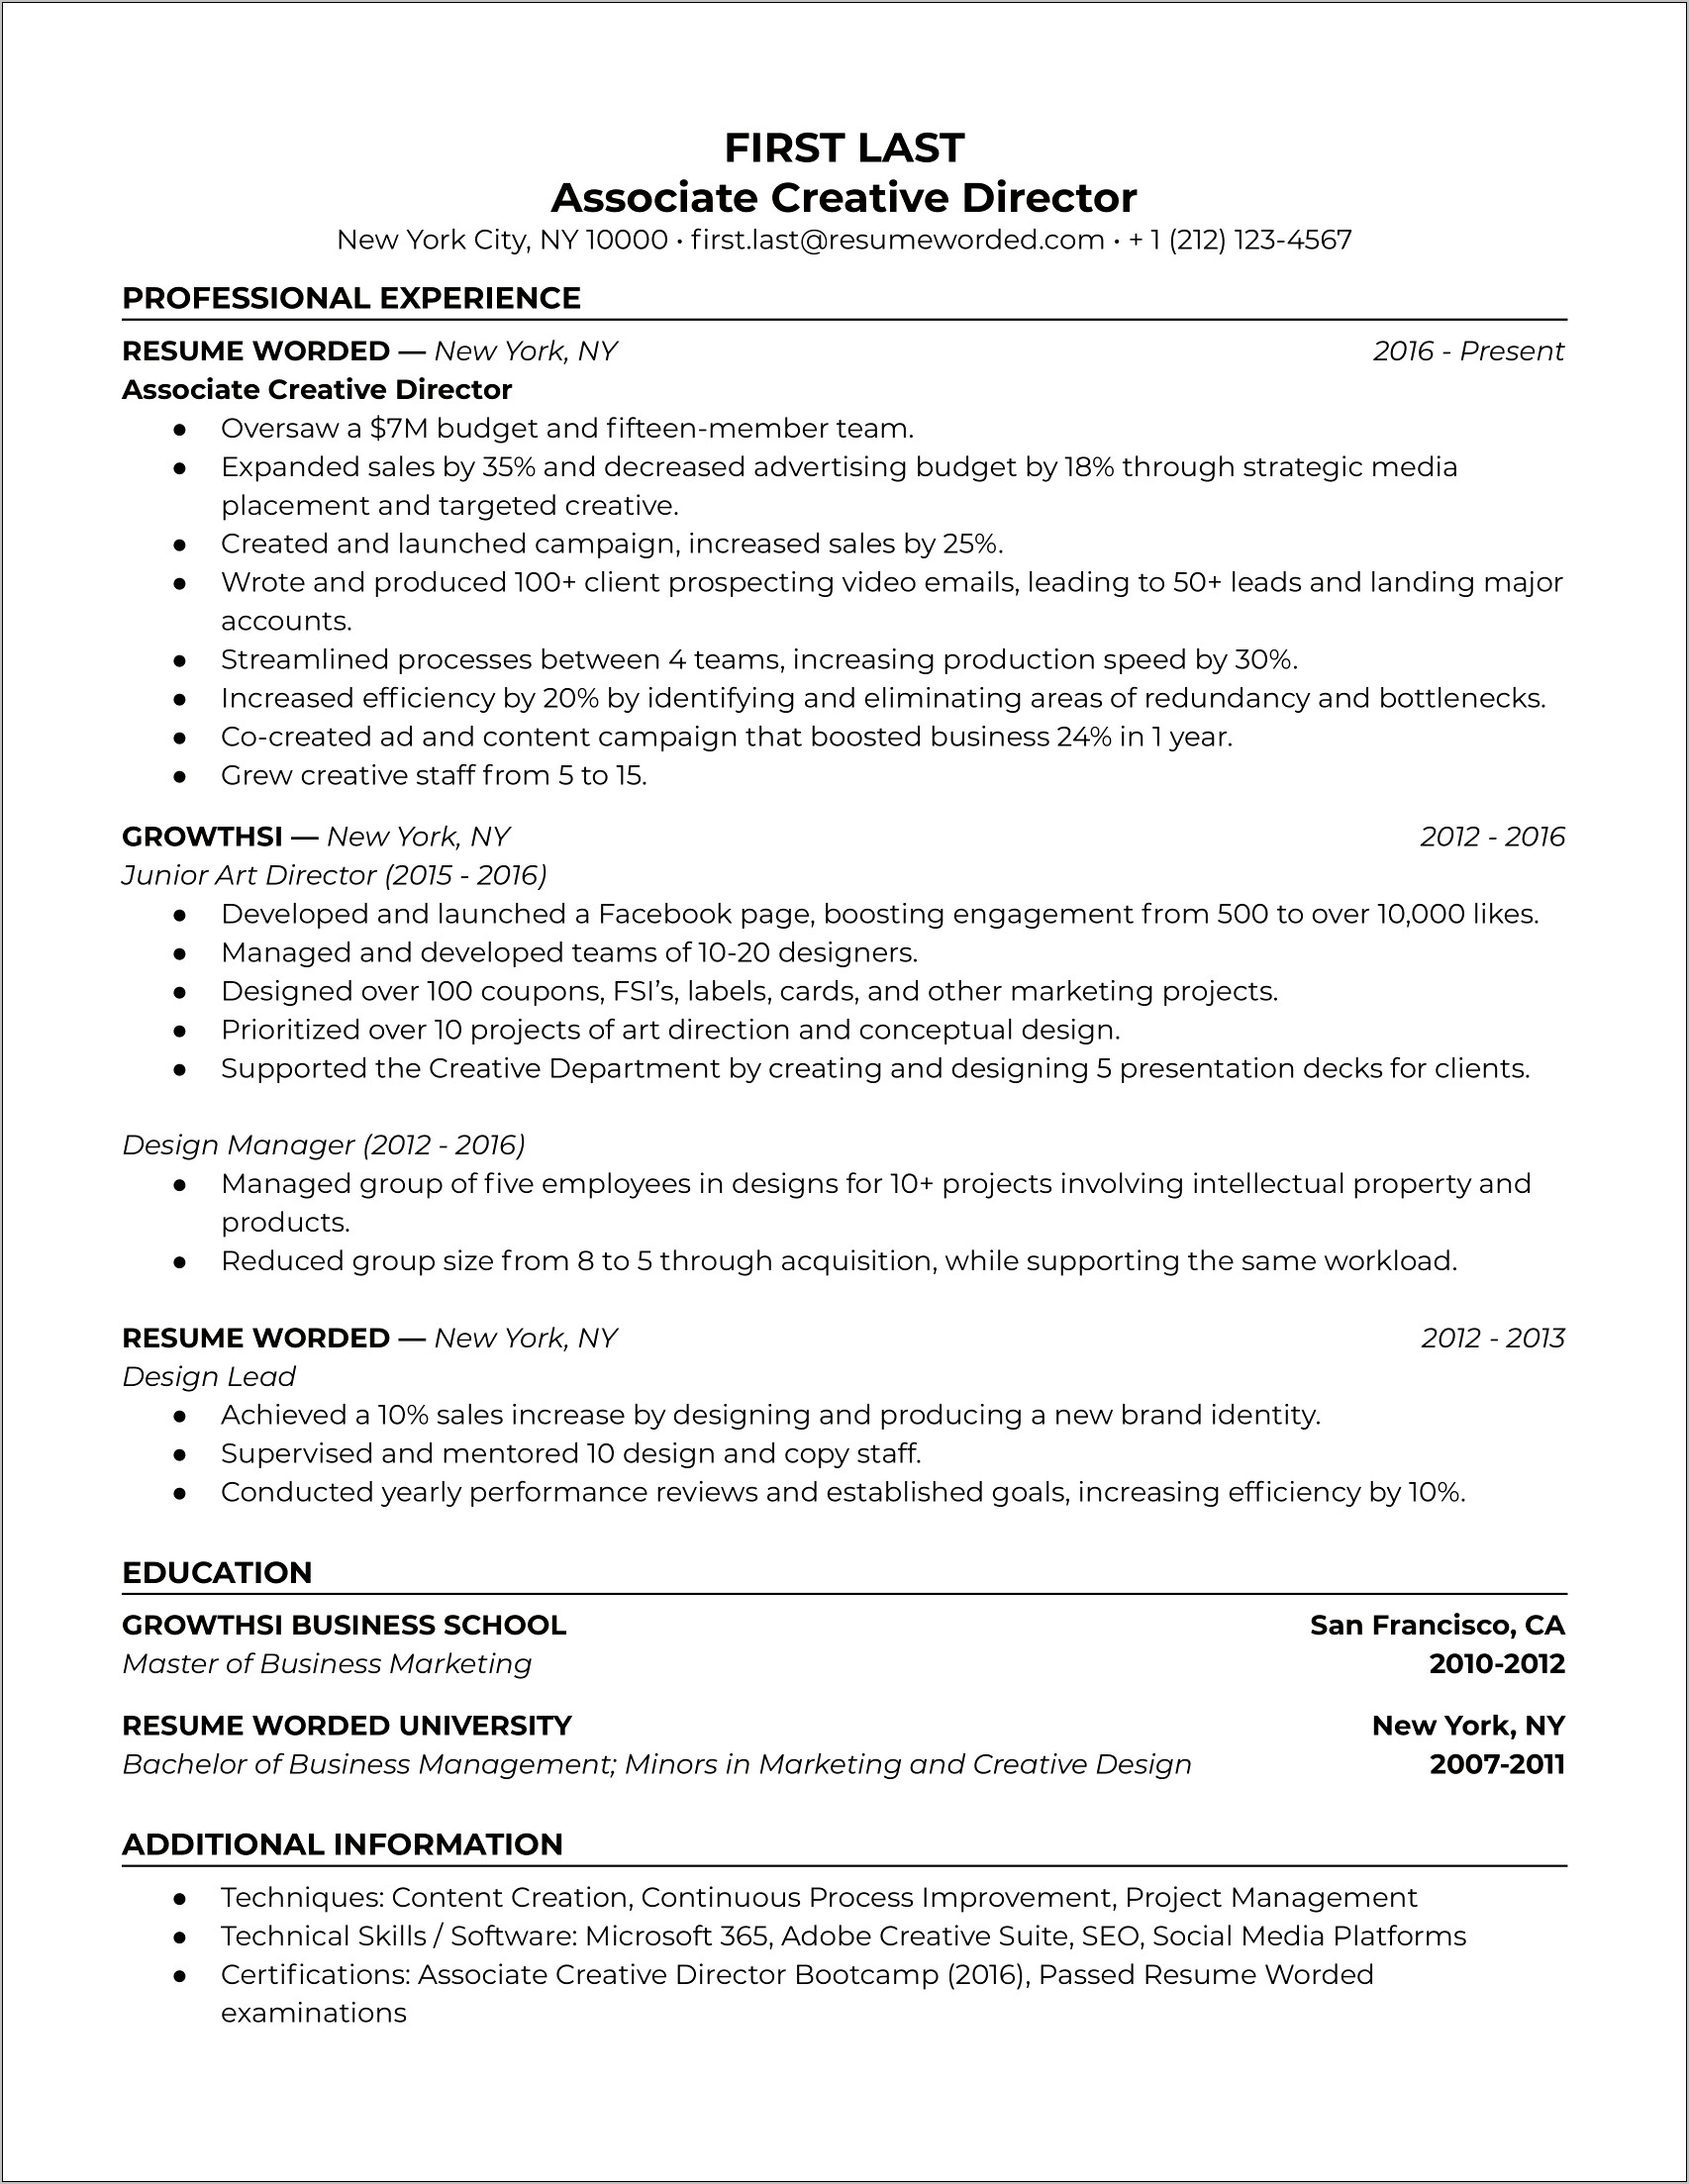 Project Manager Resume Samples Australia